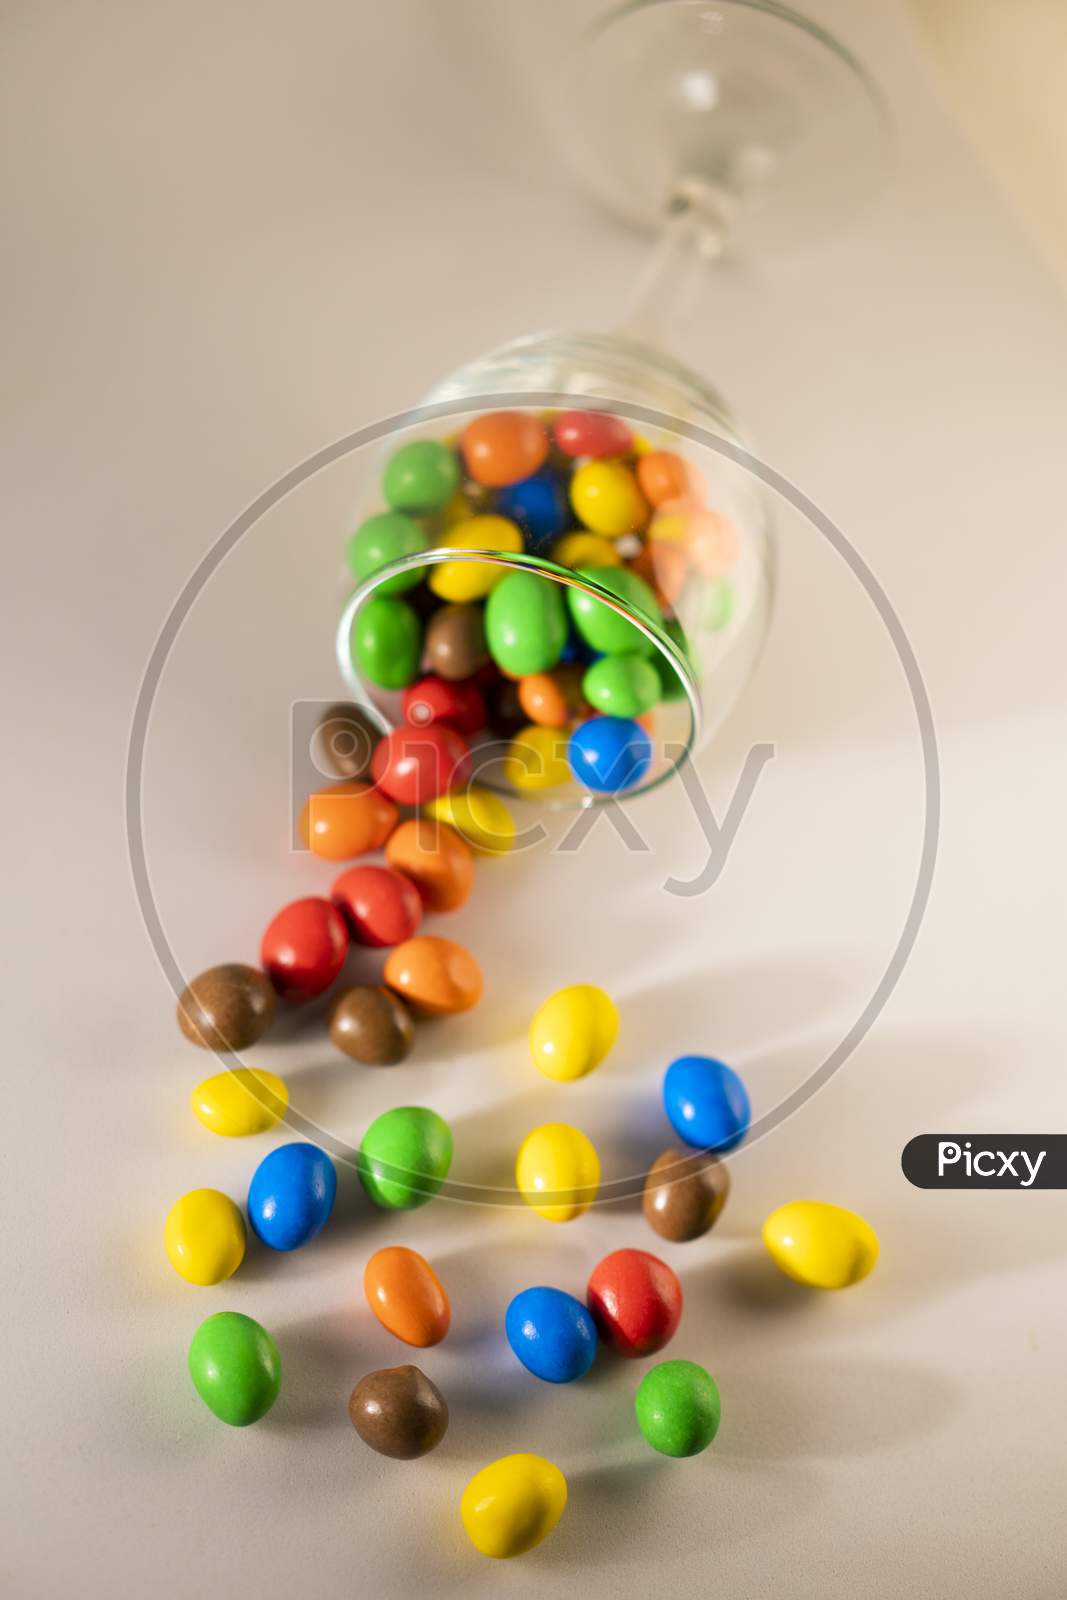 Multicolor chocolate candy or candy balls scattered on a white background.